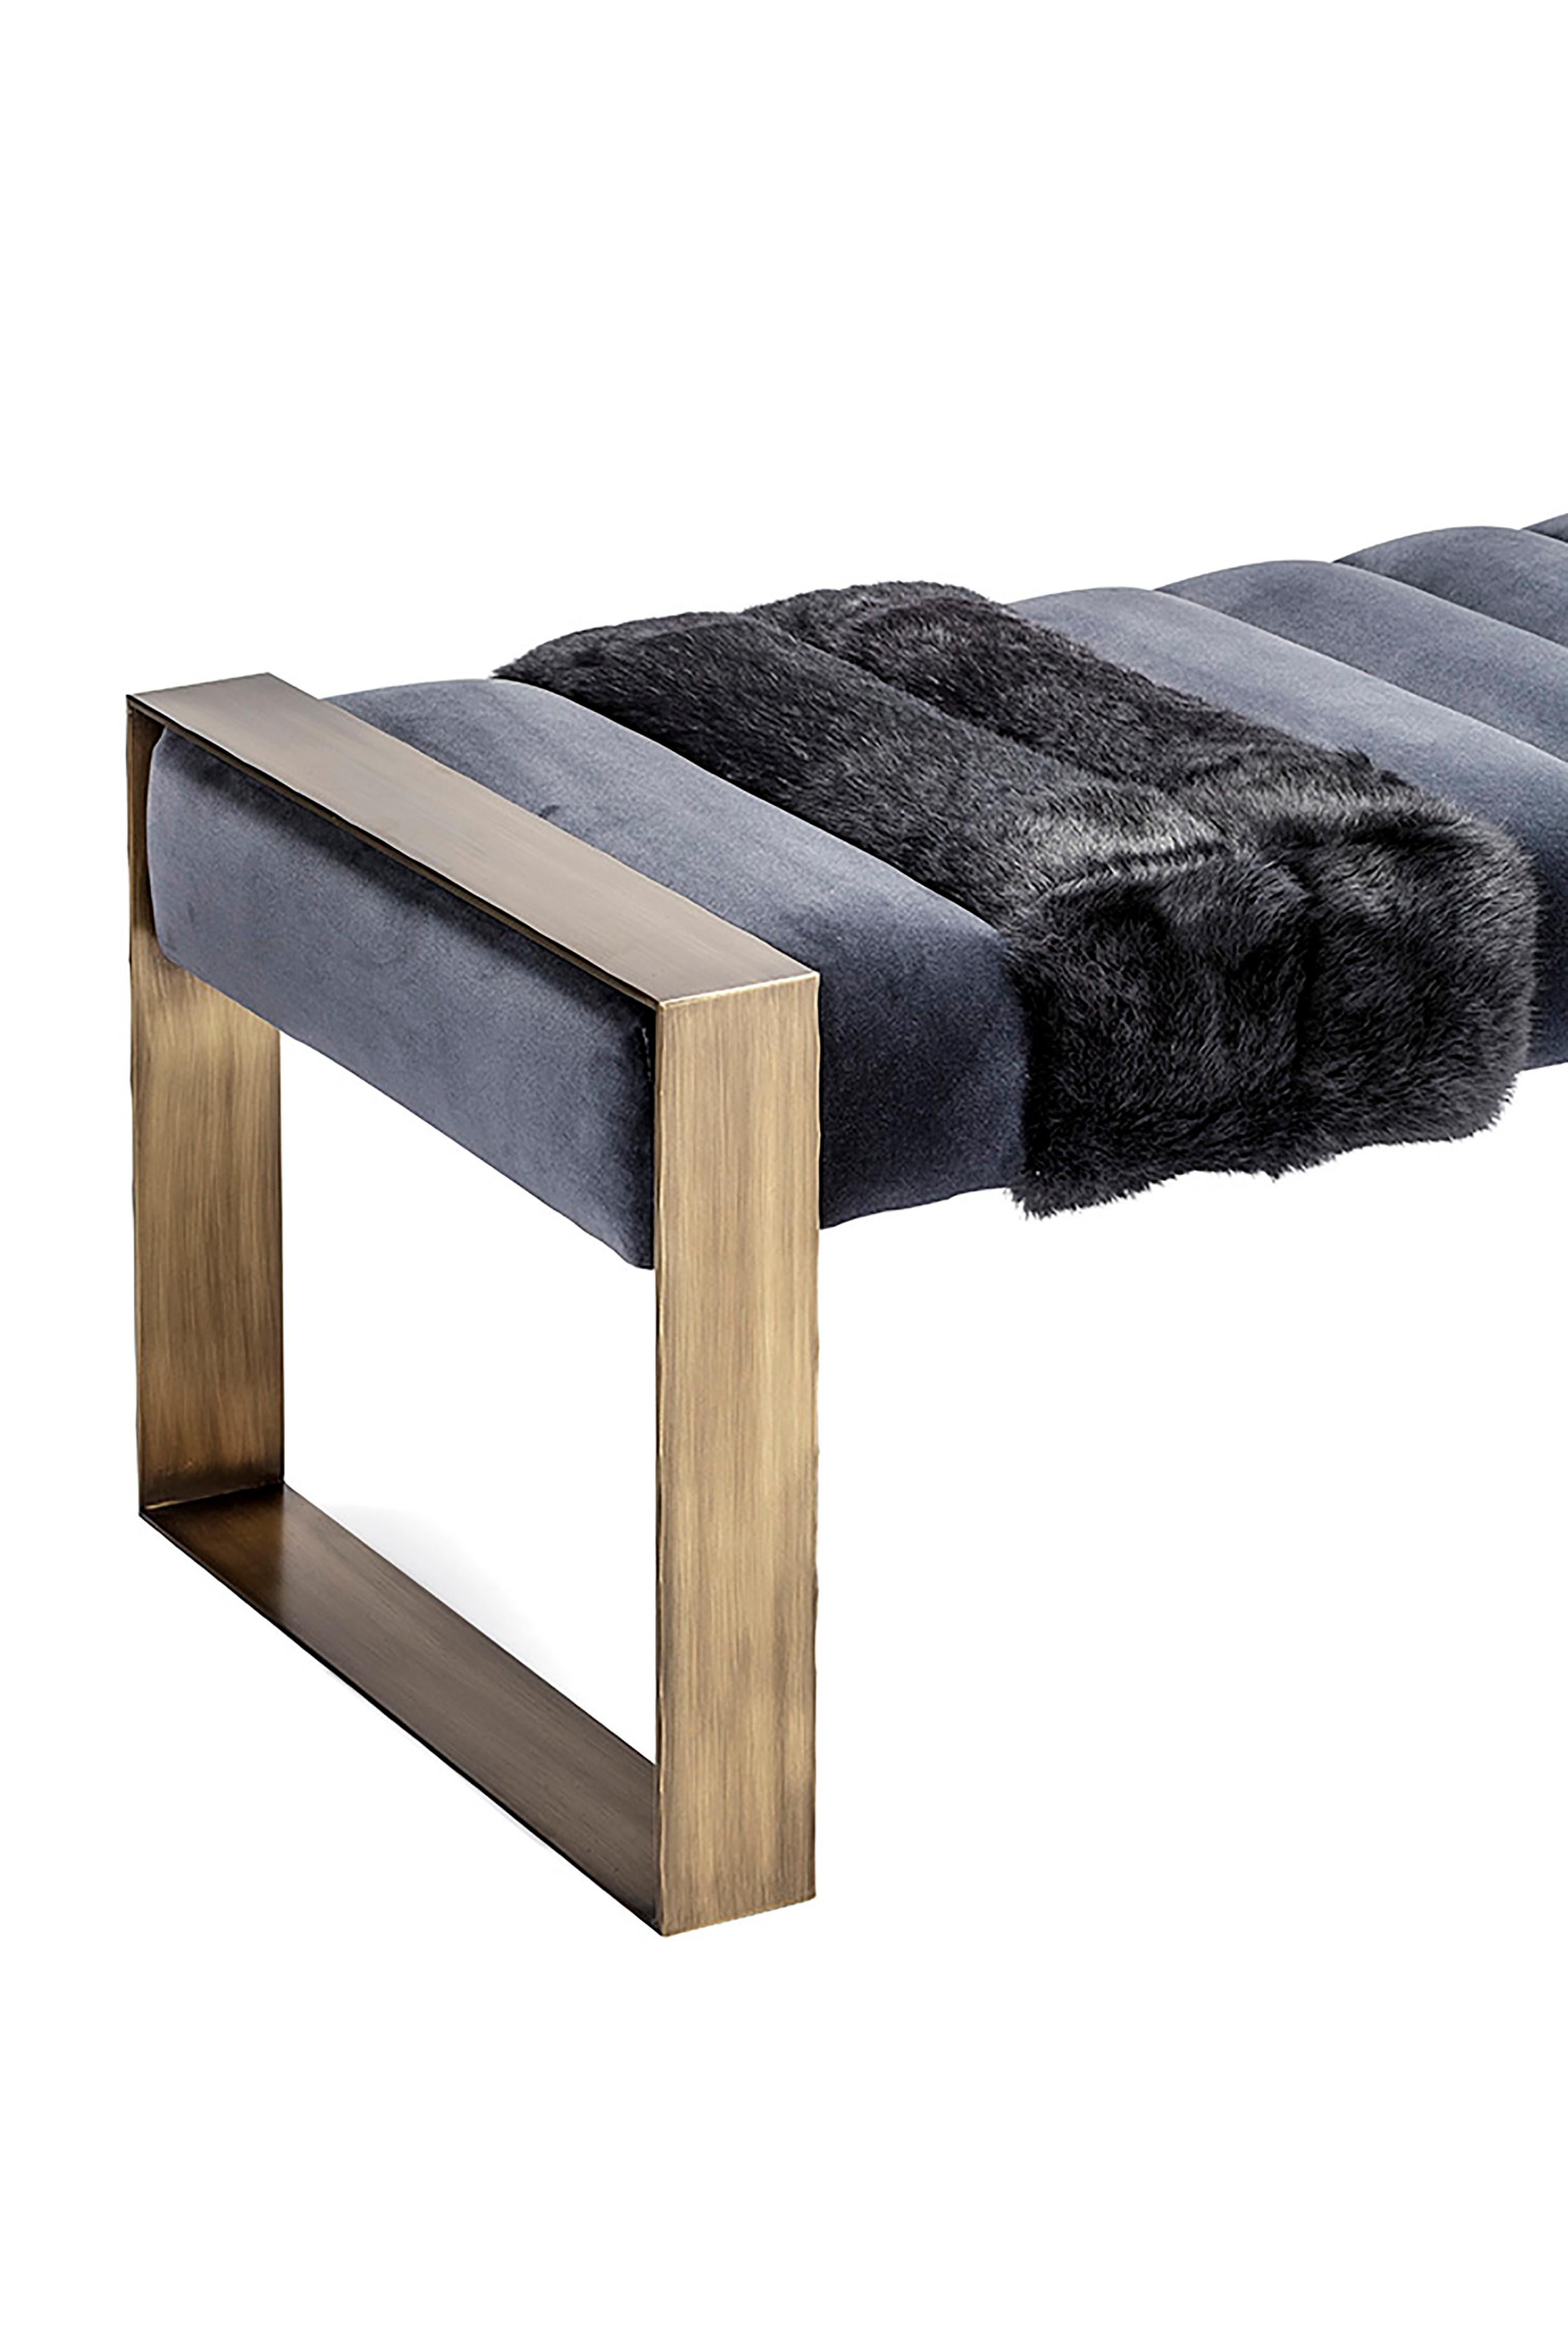 Dawn Bench, Velvet Upholstery and Brass Legs, Handcrafted in Portugal by Duistt

The DAWN bench is a statement design piece. The name dawn is inspired by the pieces clear horizontal lines and stability that the stripes and open structure provides